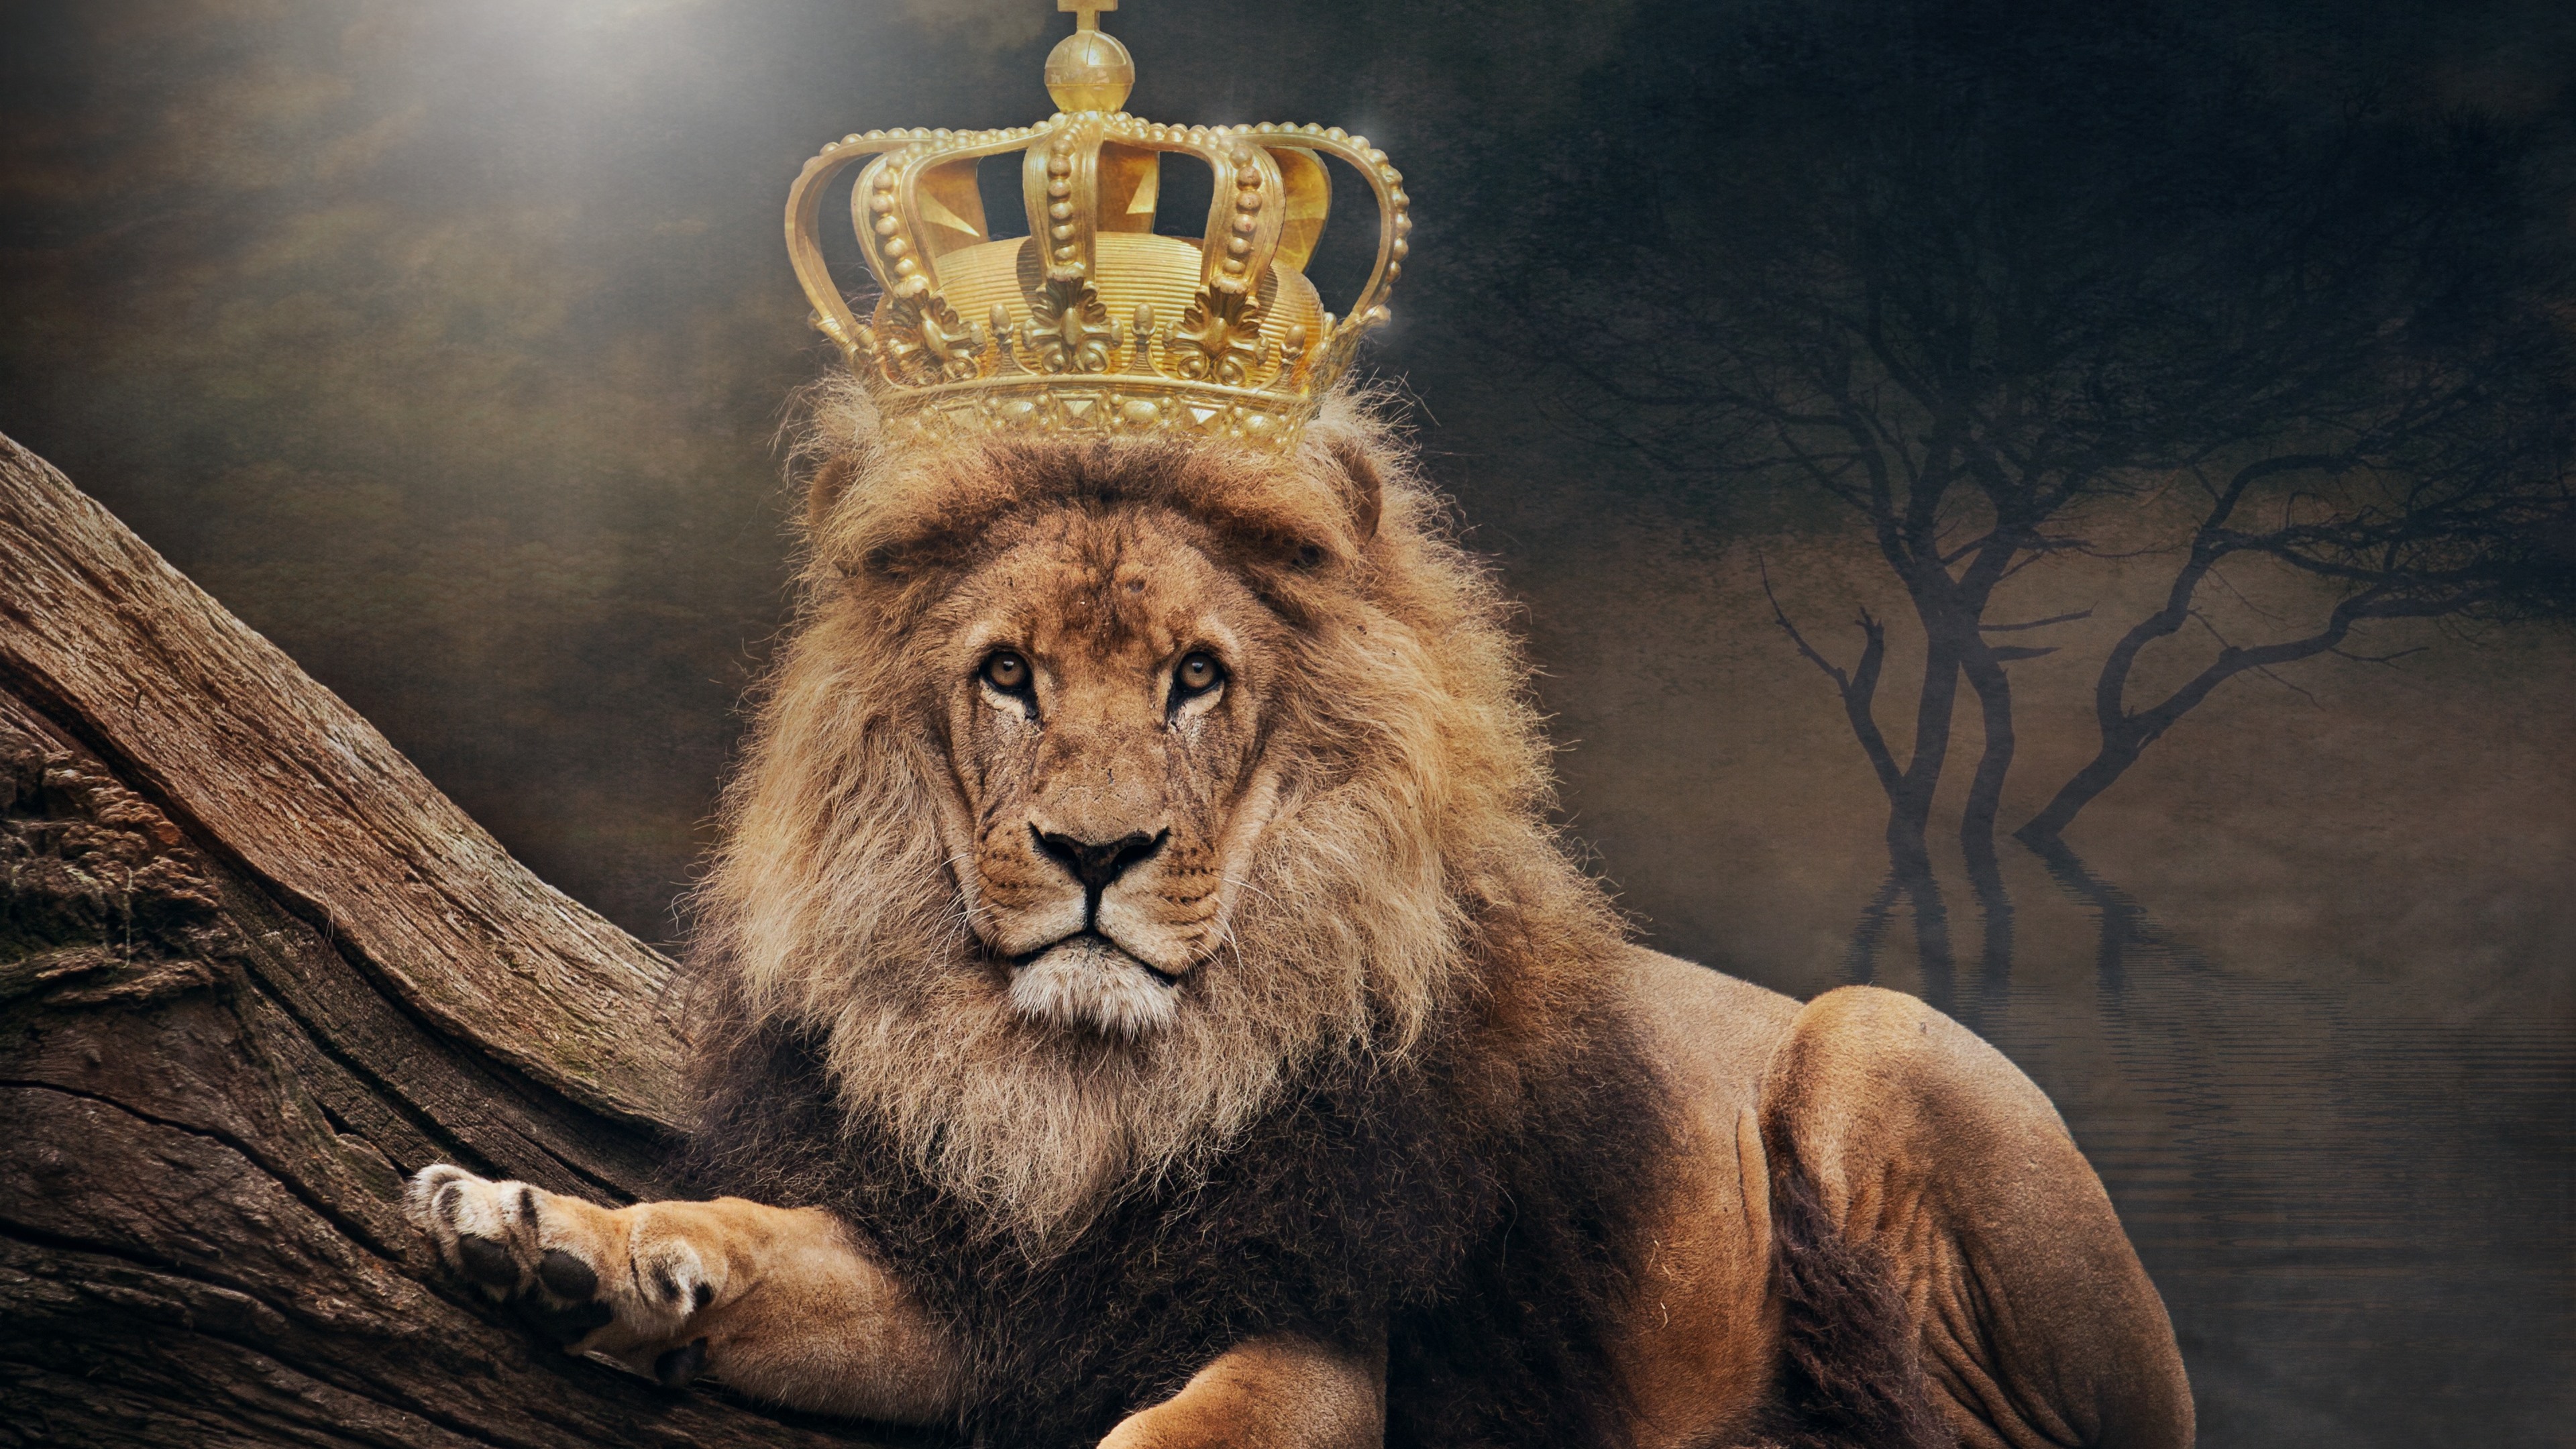 Wallpapers Lion, king, crown 3840x2160 UHD 4K Picture, Image.